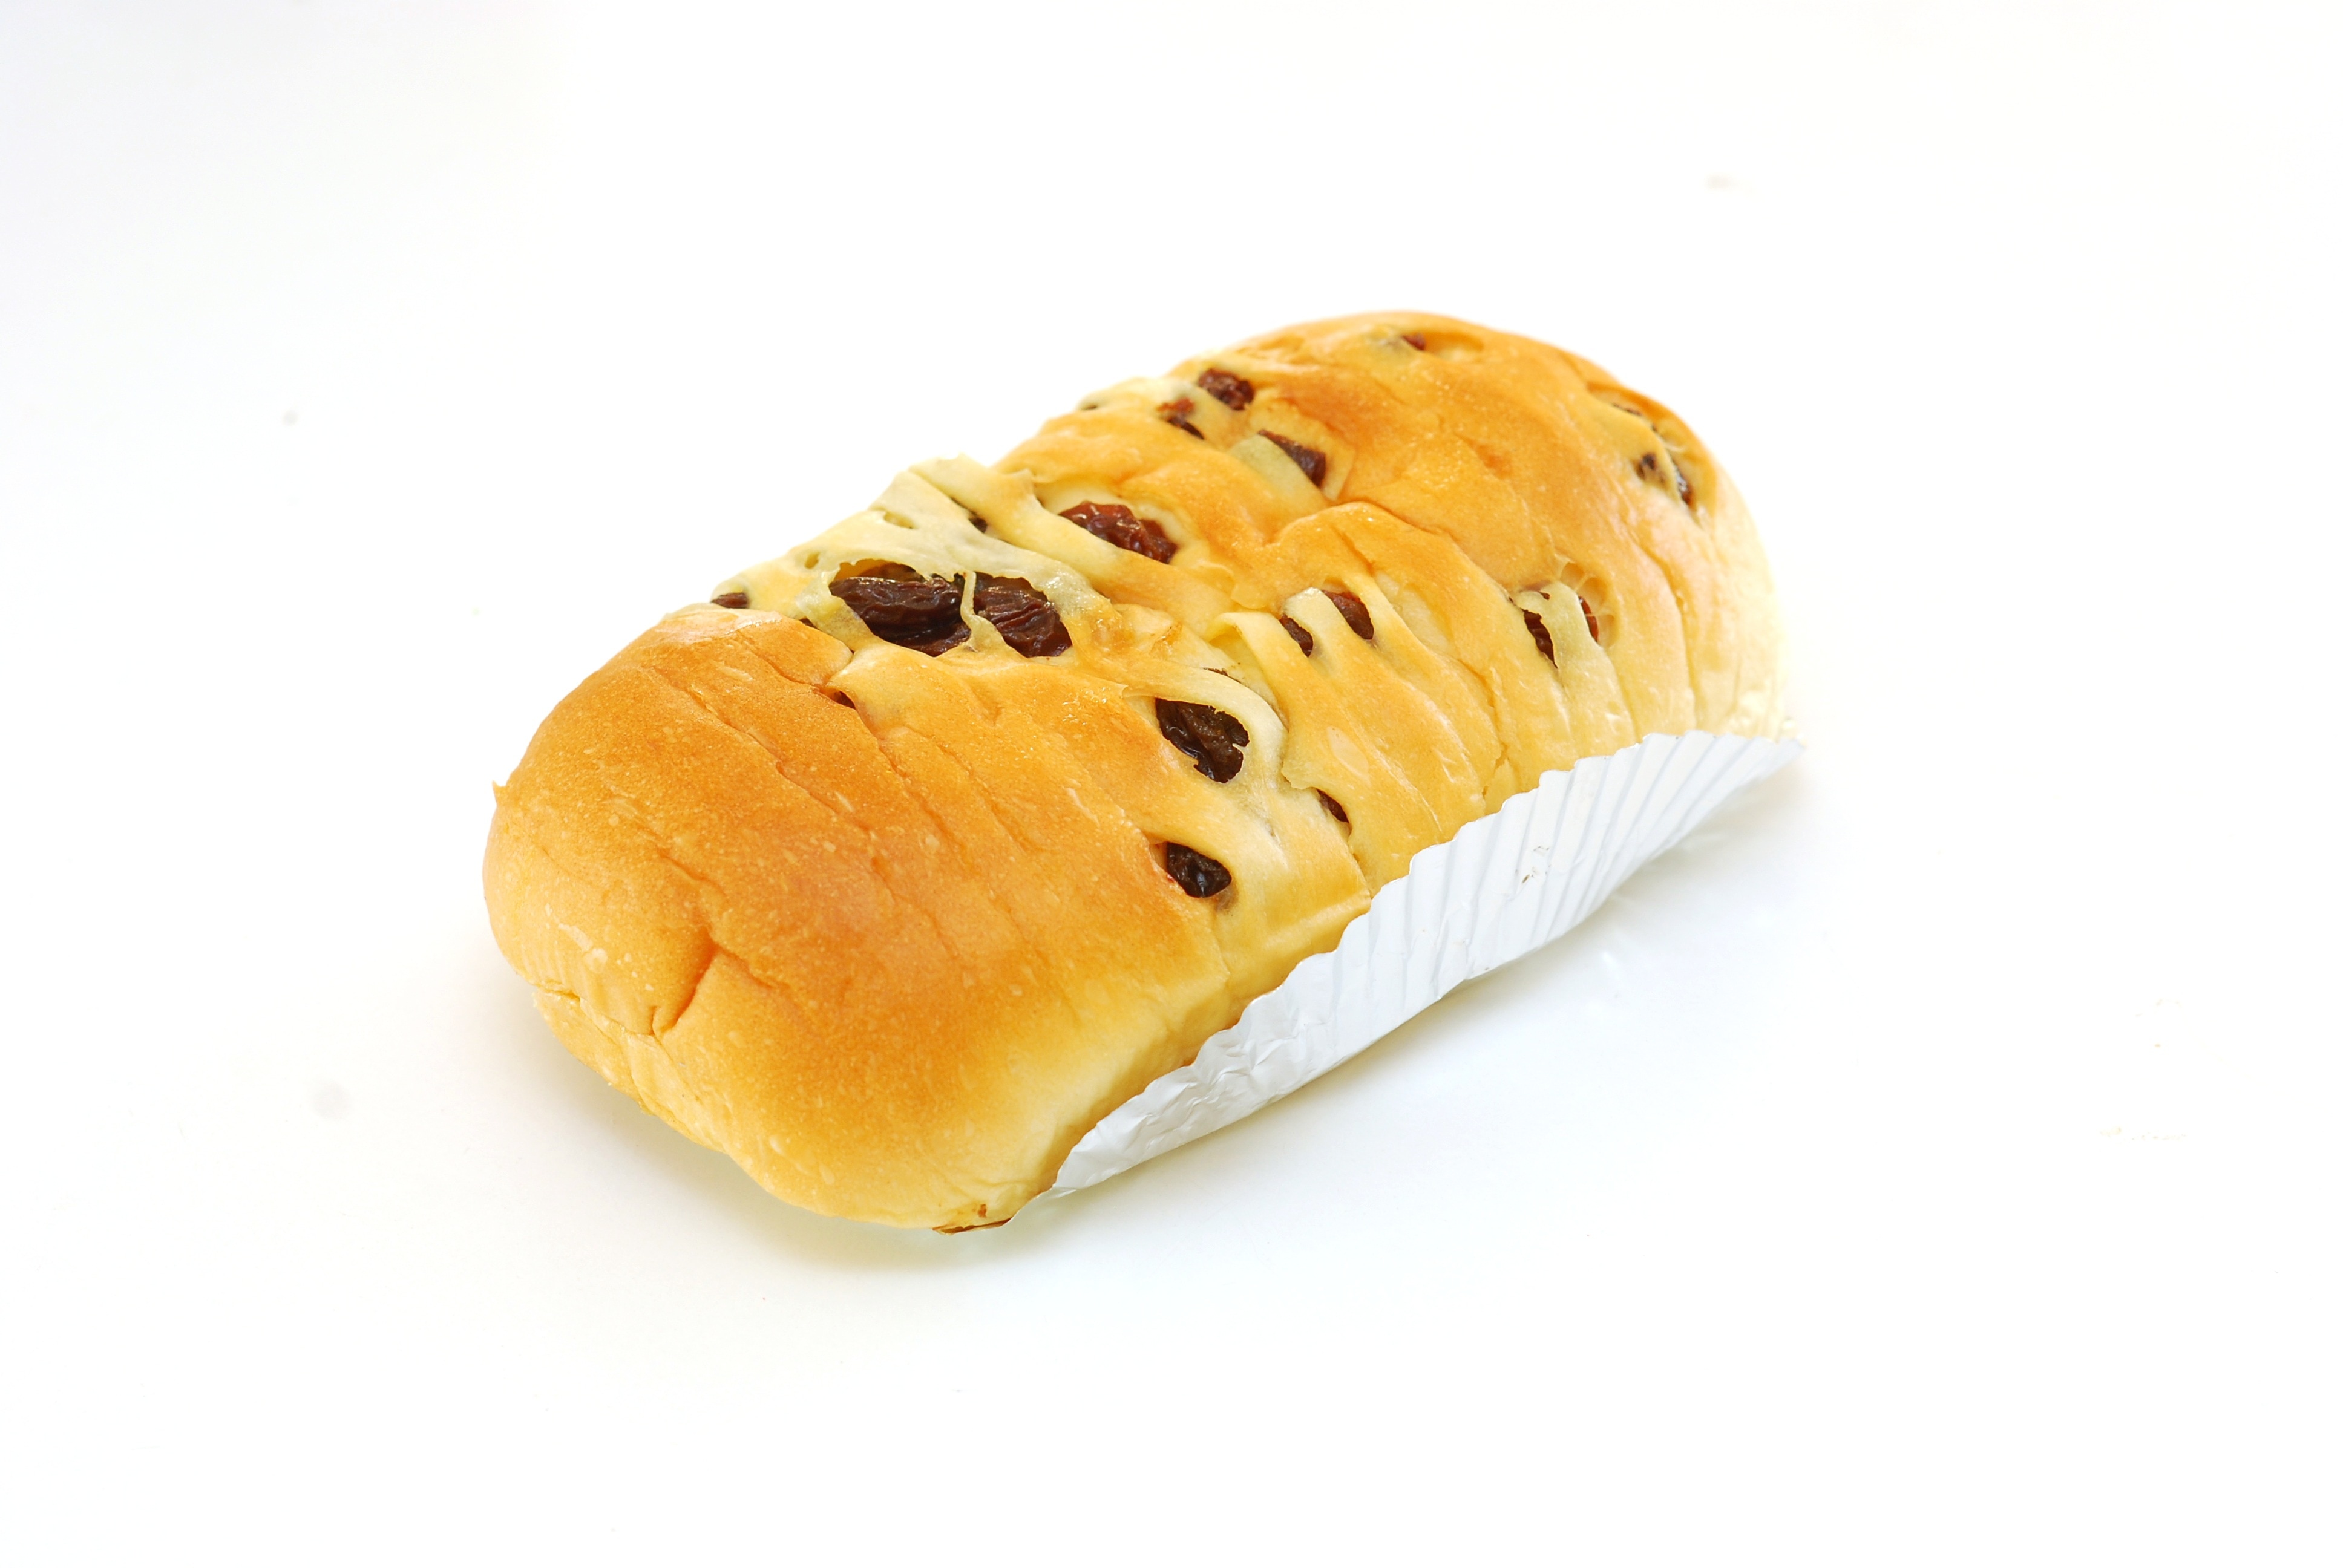 bread with raisin toppings shown